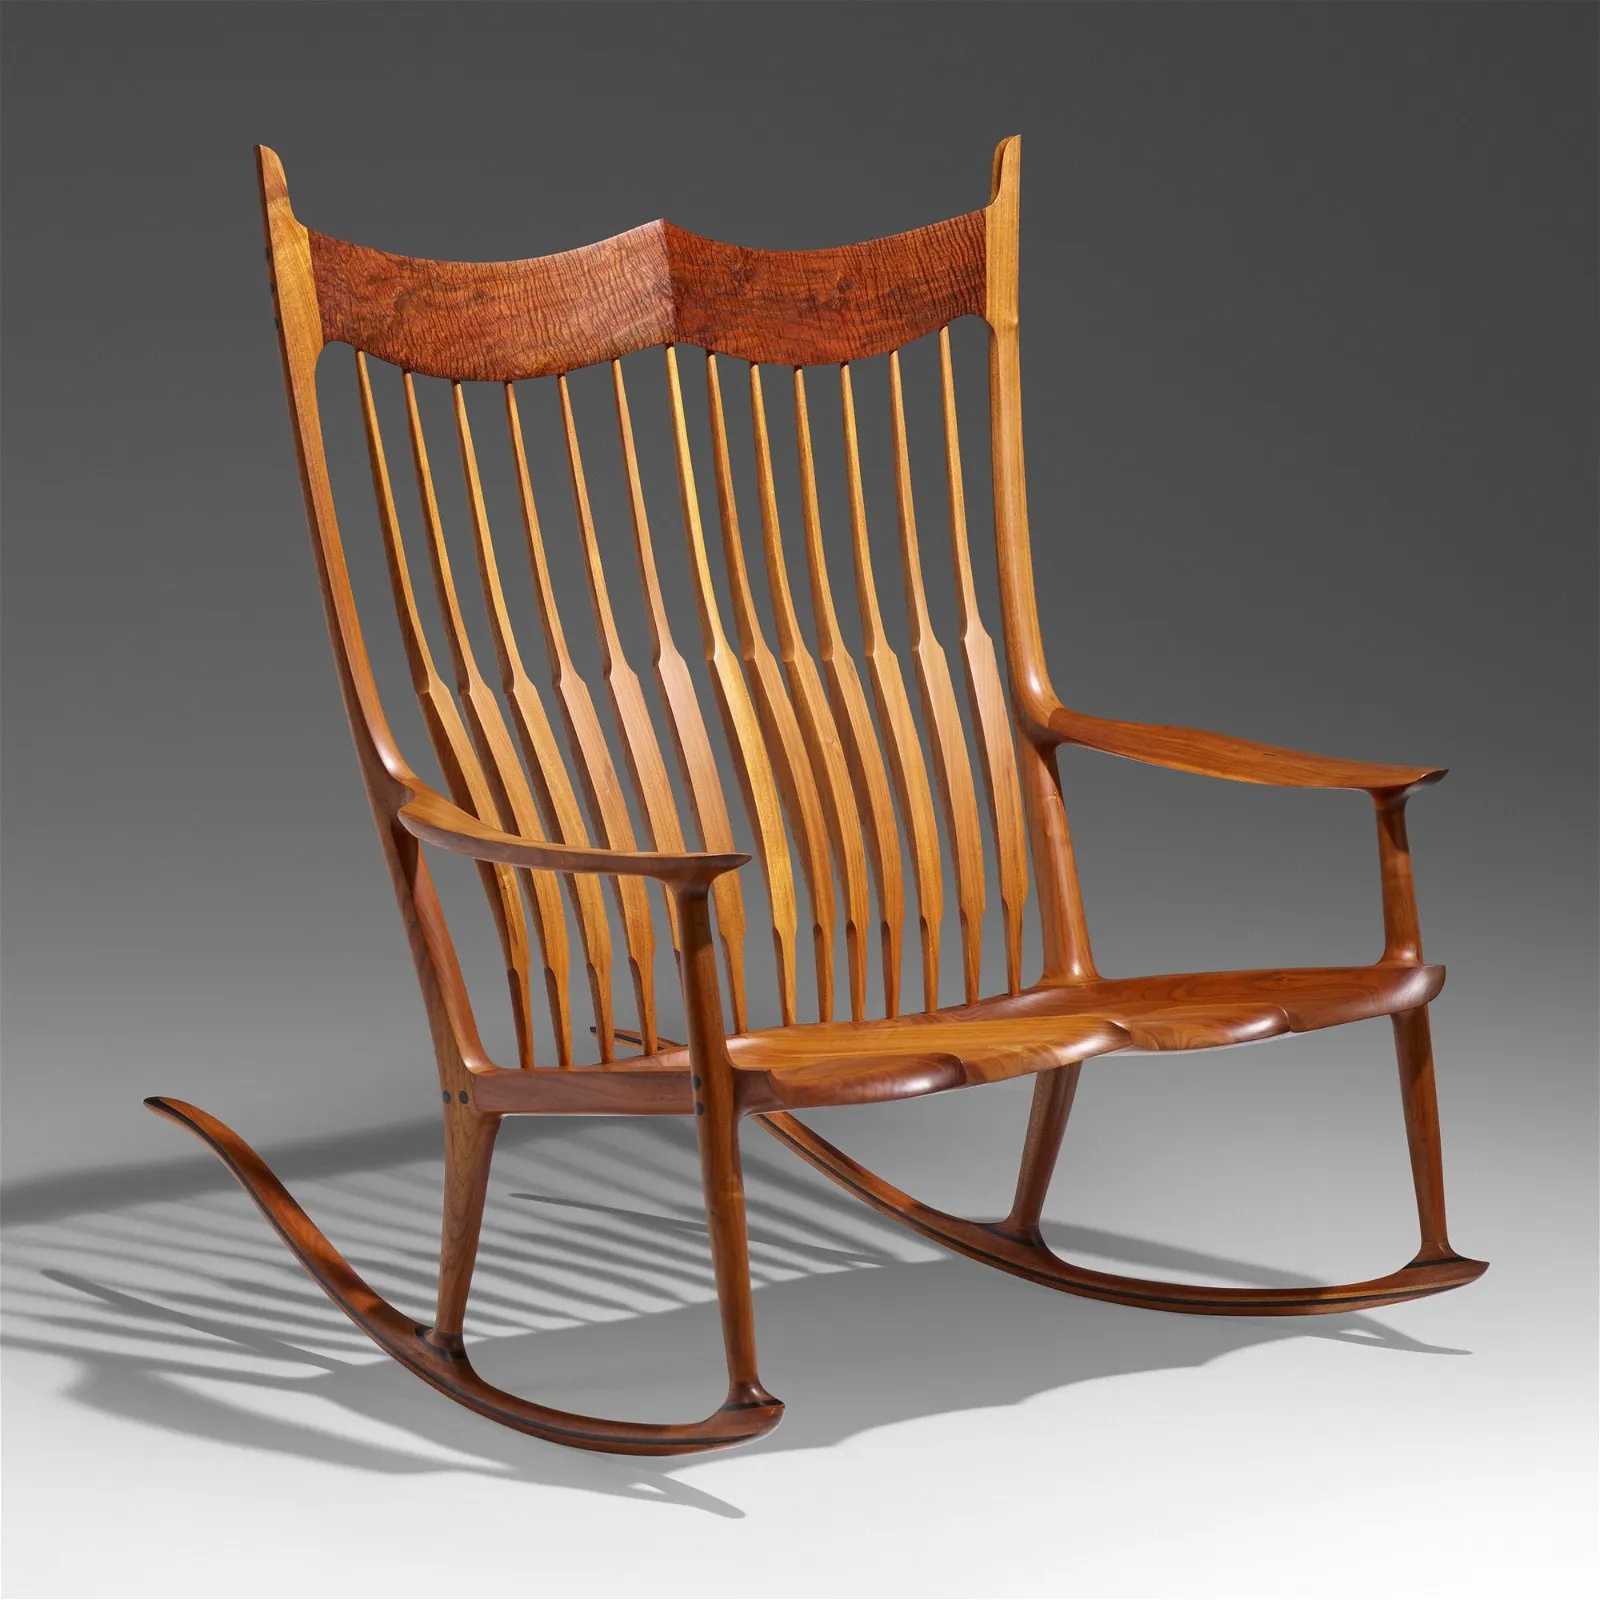 Sam Maloof double rocking chair, estimated at $30,000-$50,000 at Los Angeles Modern Auctions (LAMA) on April 30.